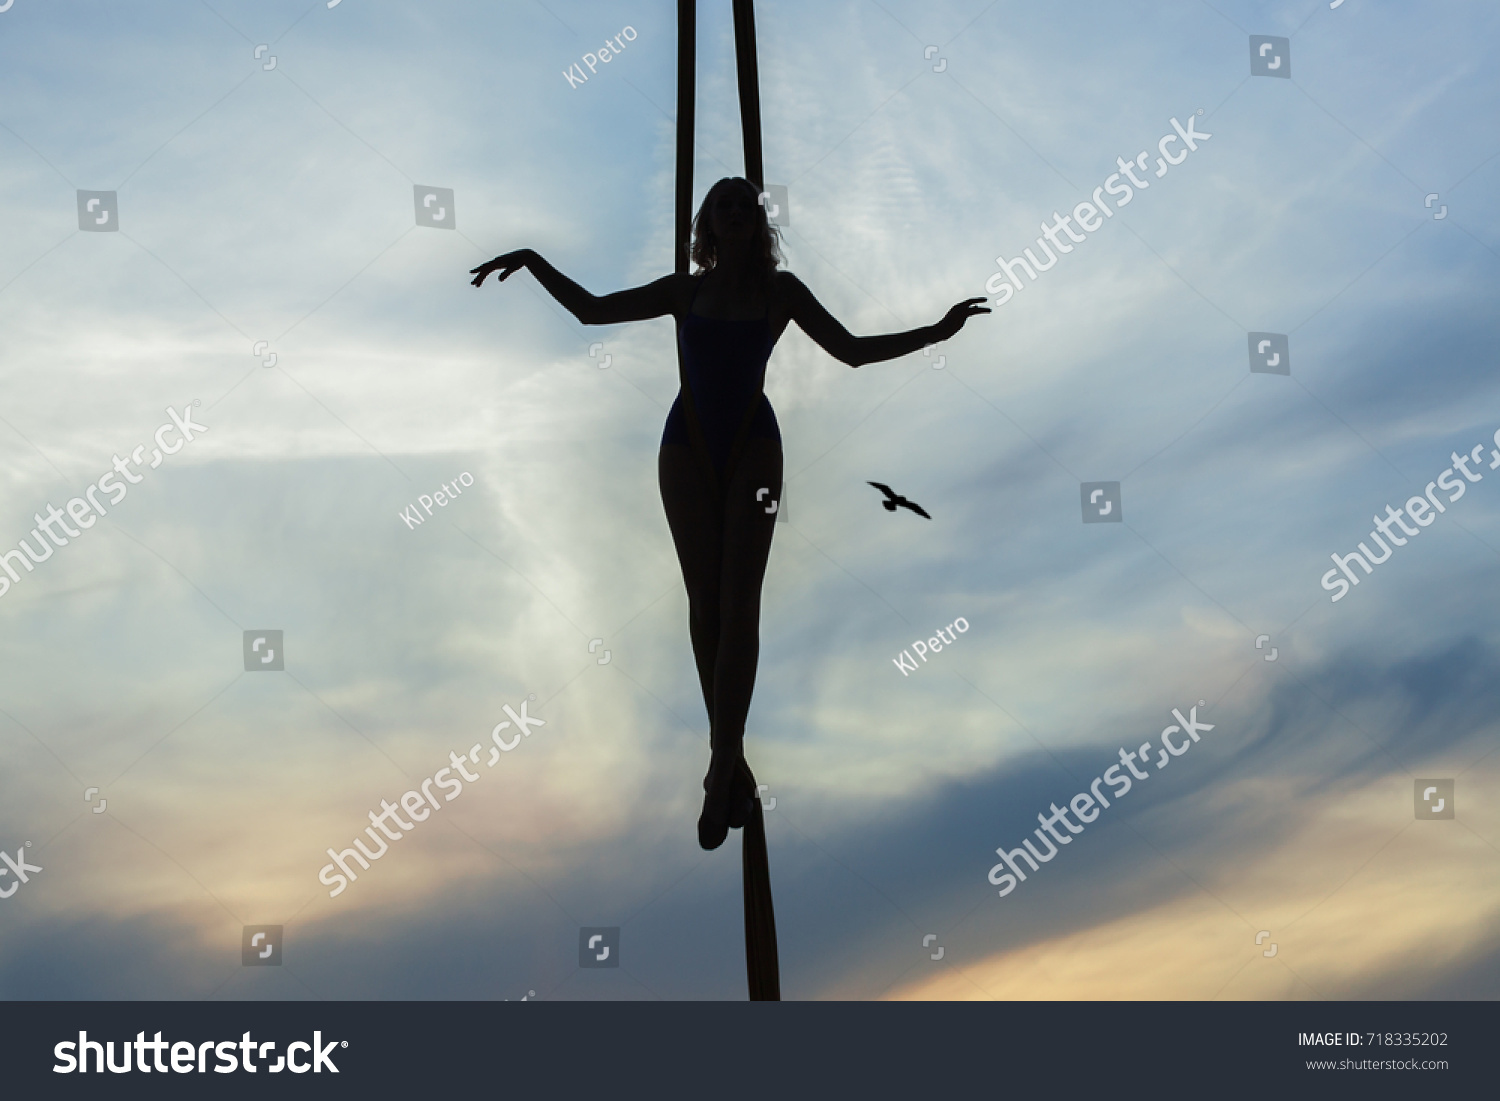 Woman balancing actor on the background of the setting sun, contours of the figure. #718335202